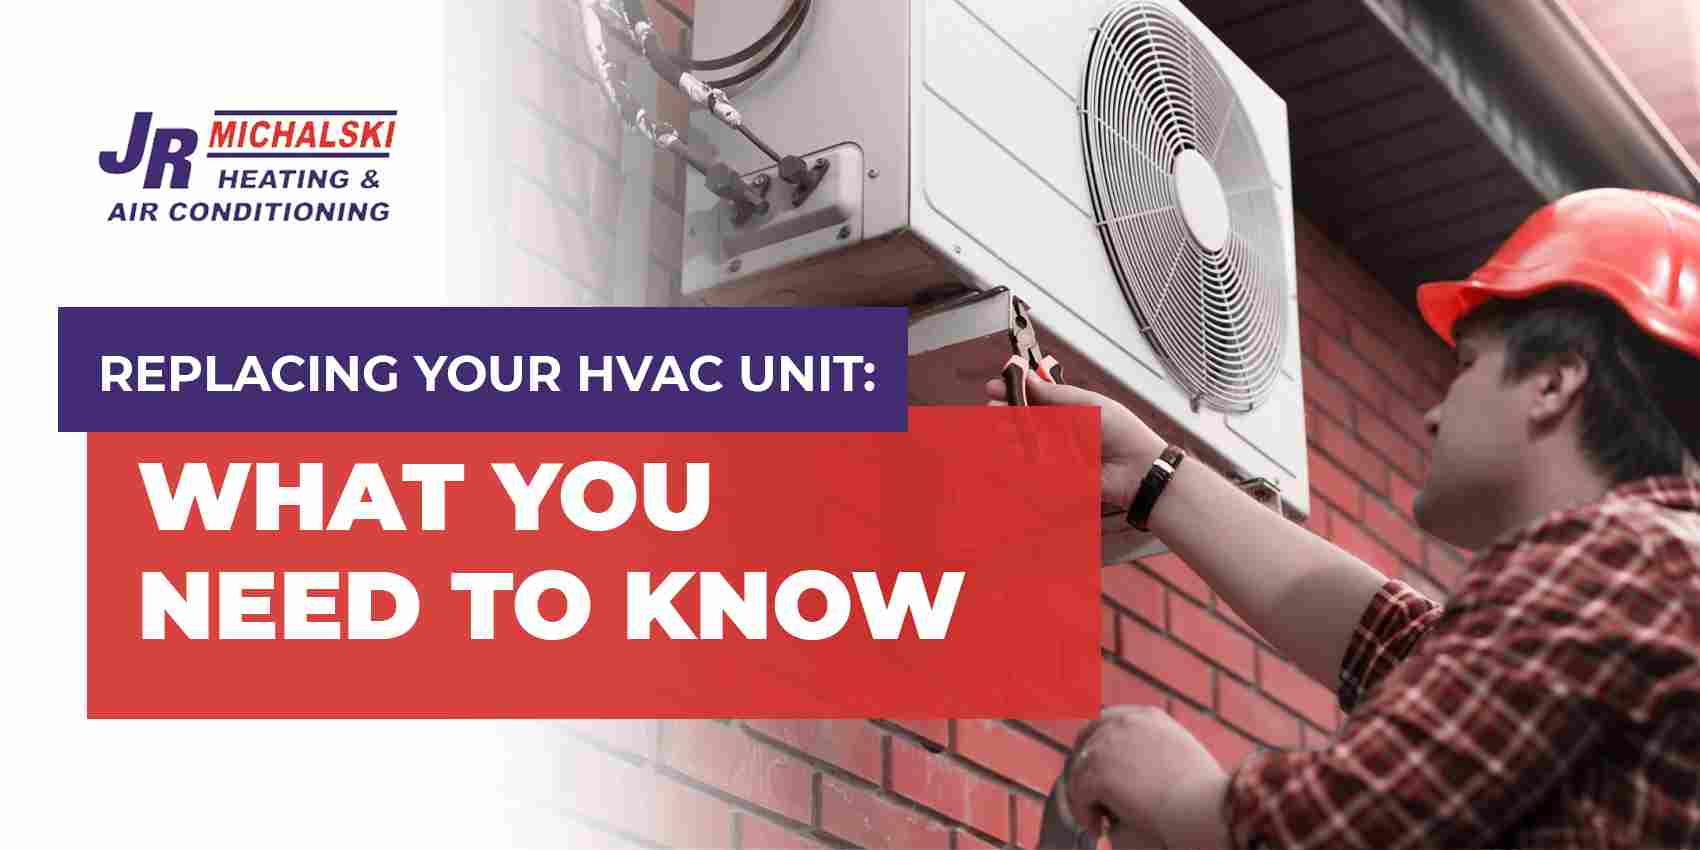 Replacing Your HVAC Unit: What You Need to Know